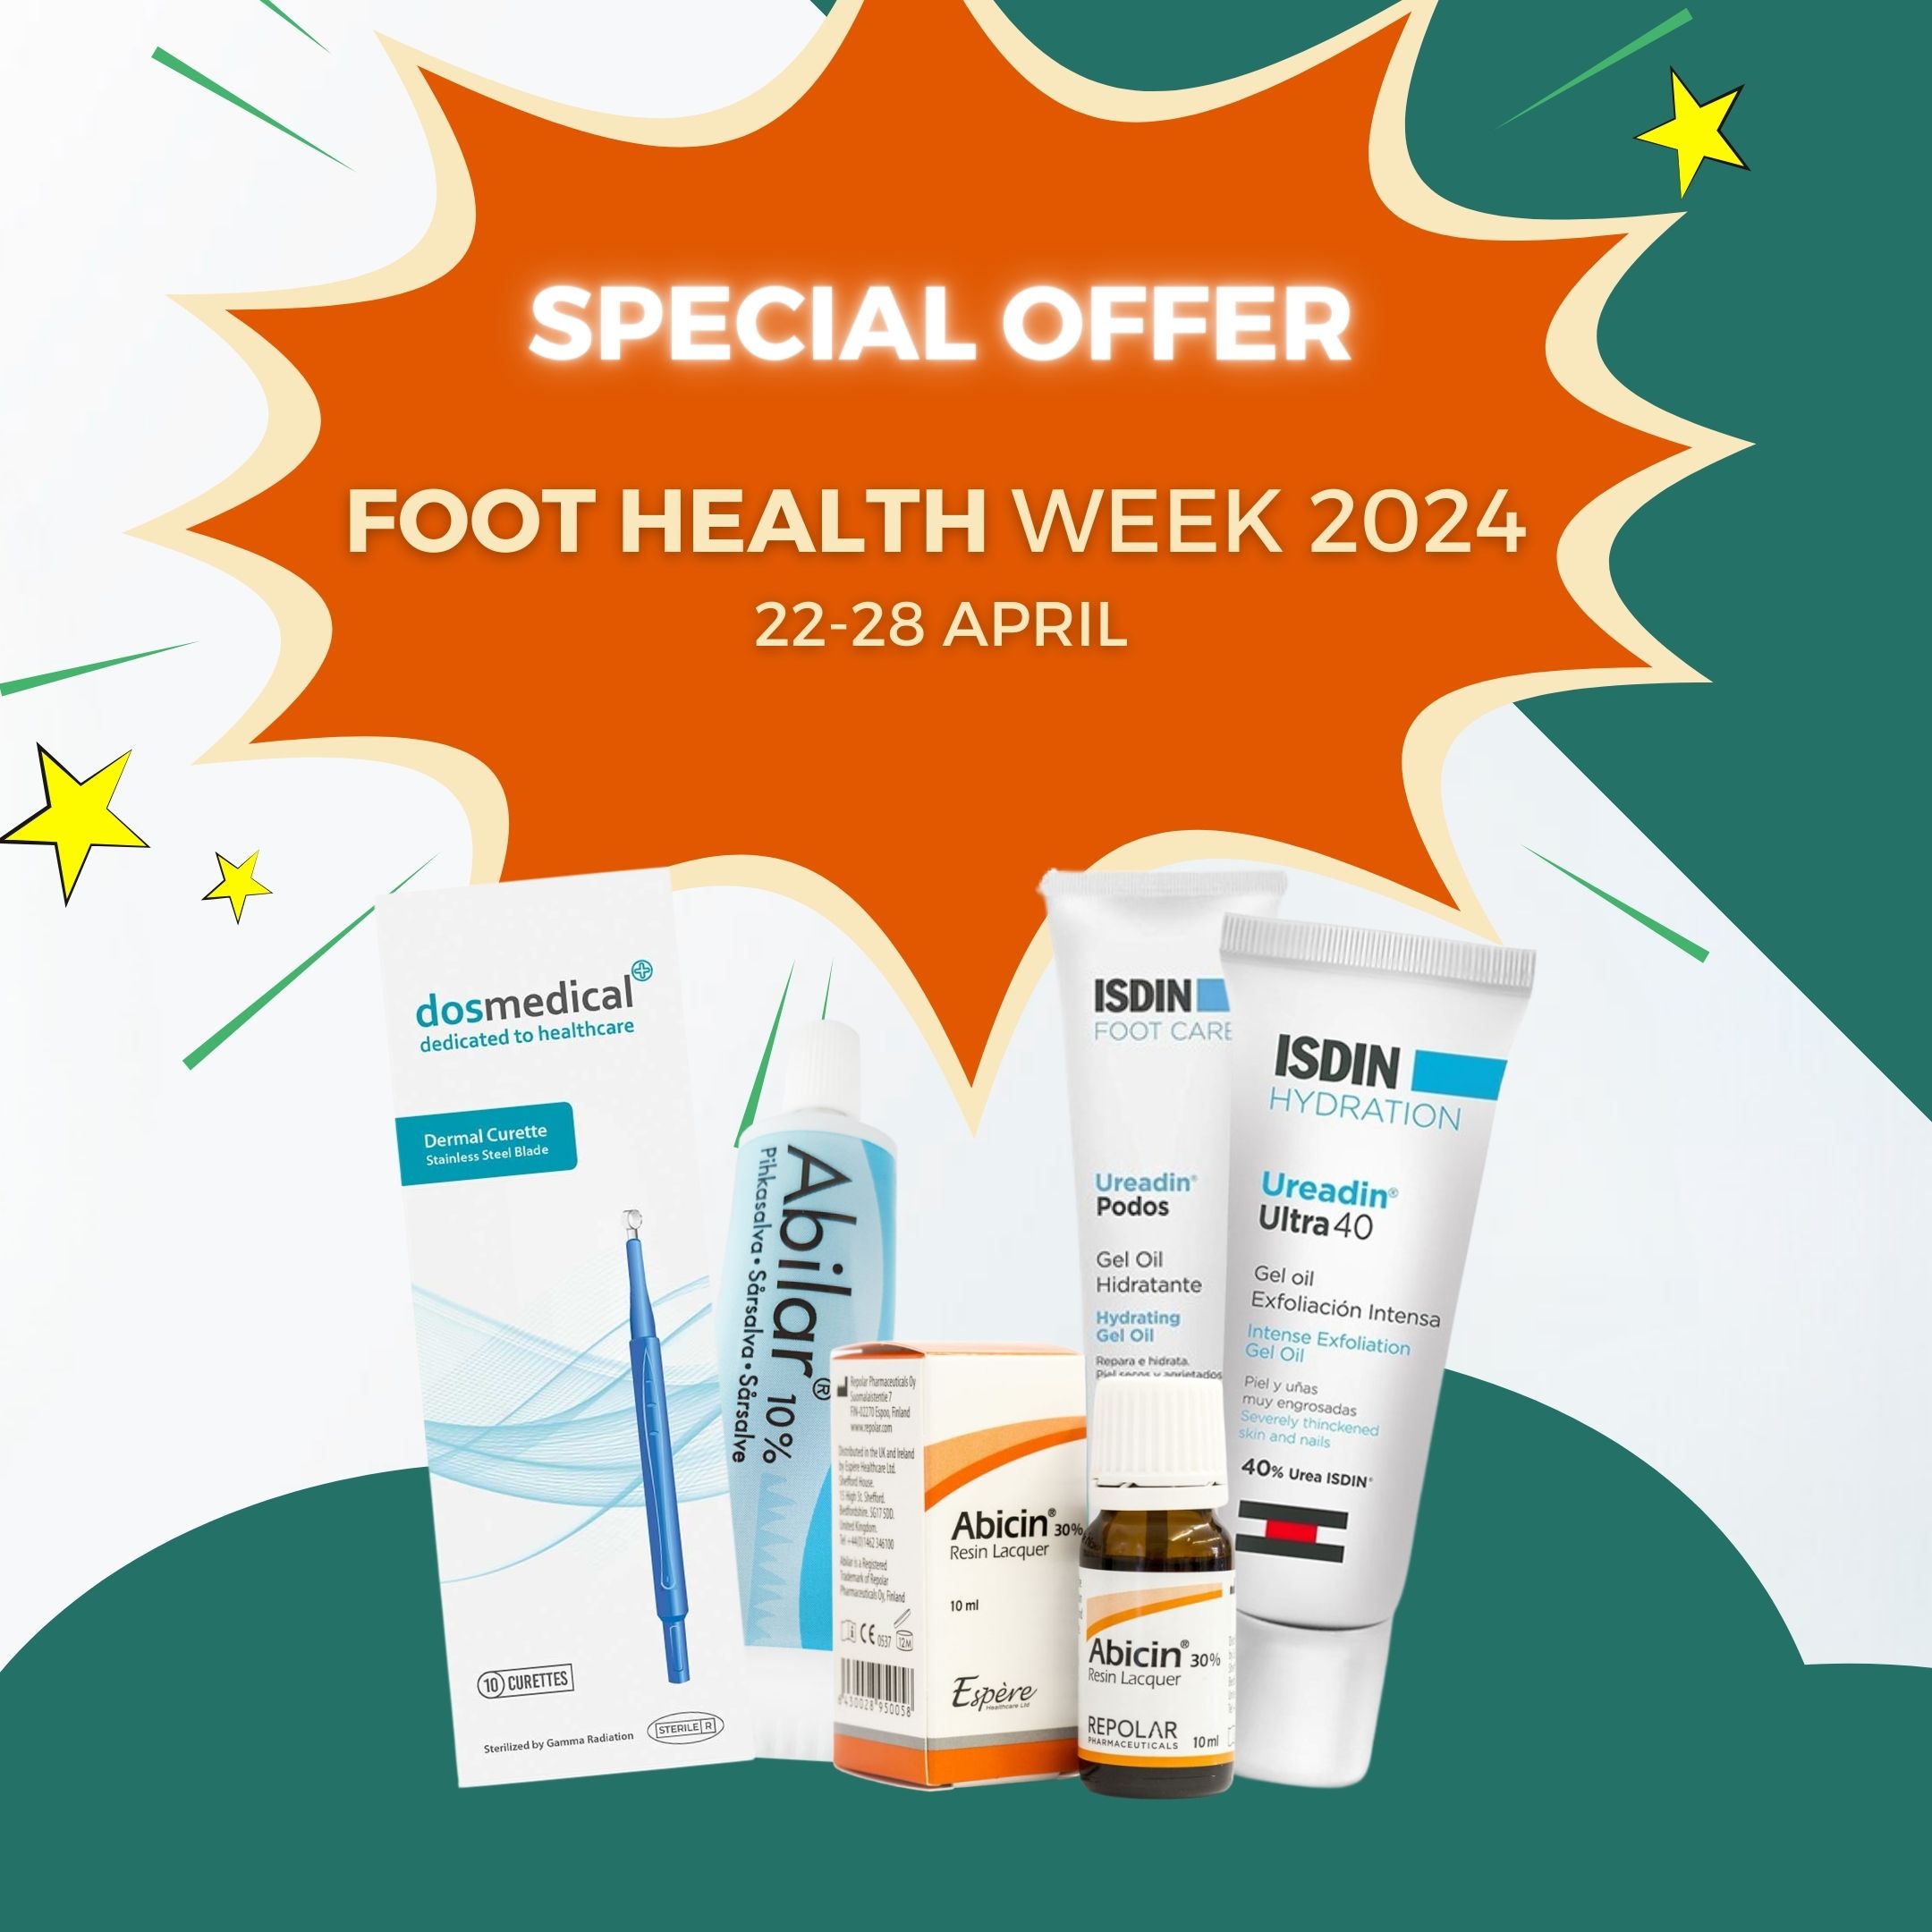 Foot Health Week Guide: Essential Tips for Healthy Feet and Exclusive Offers